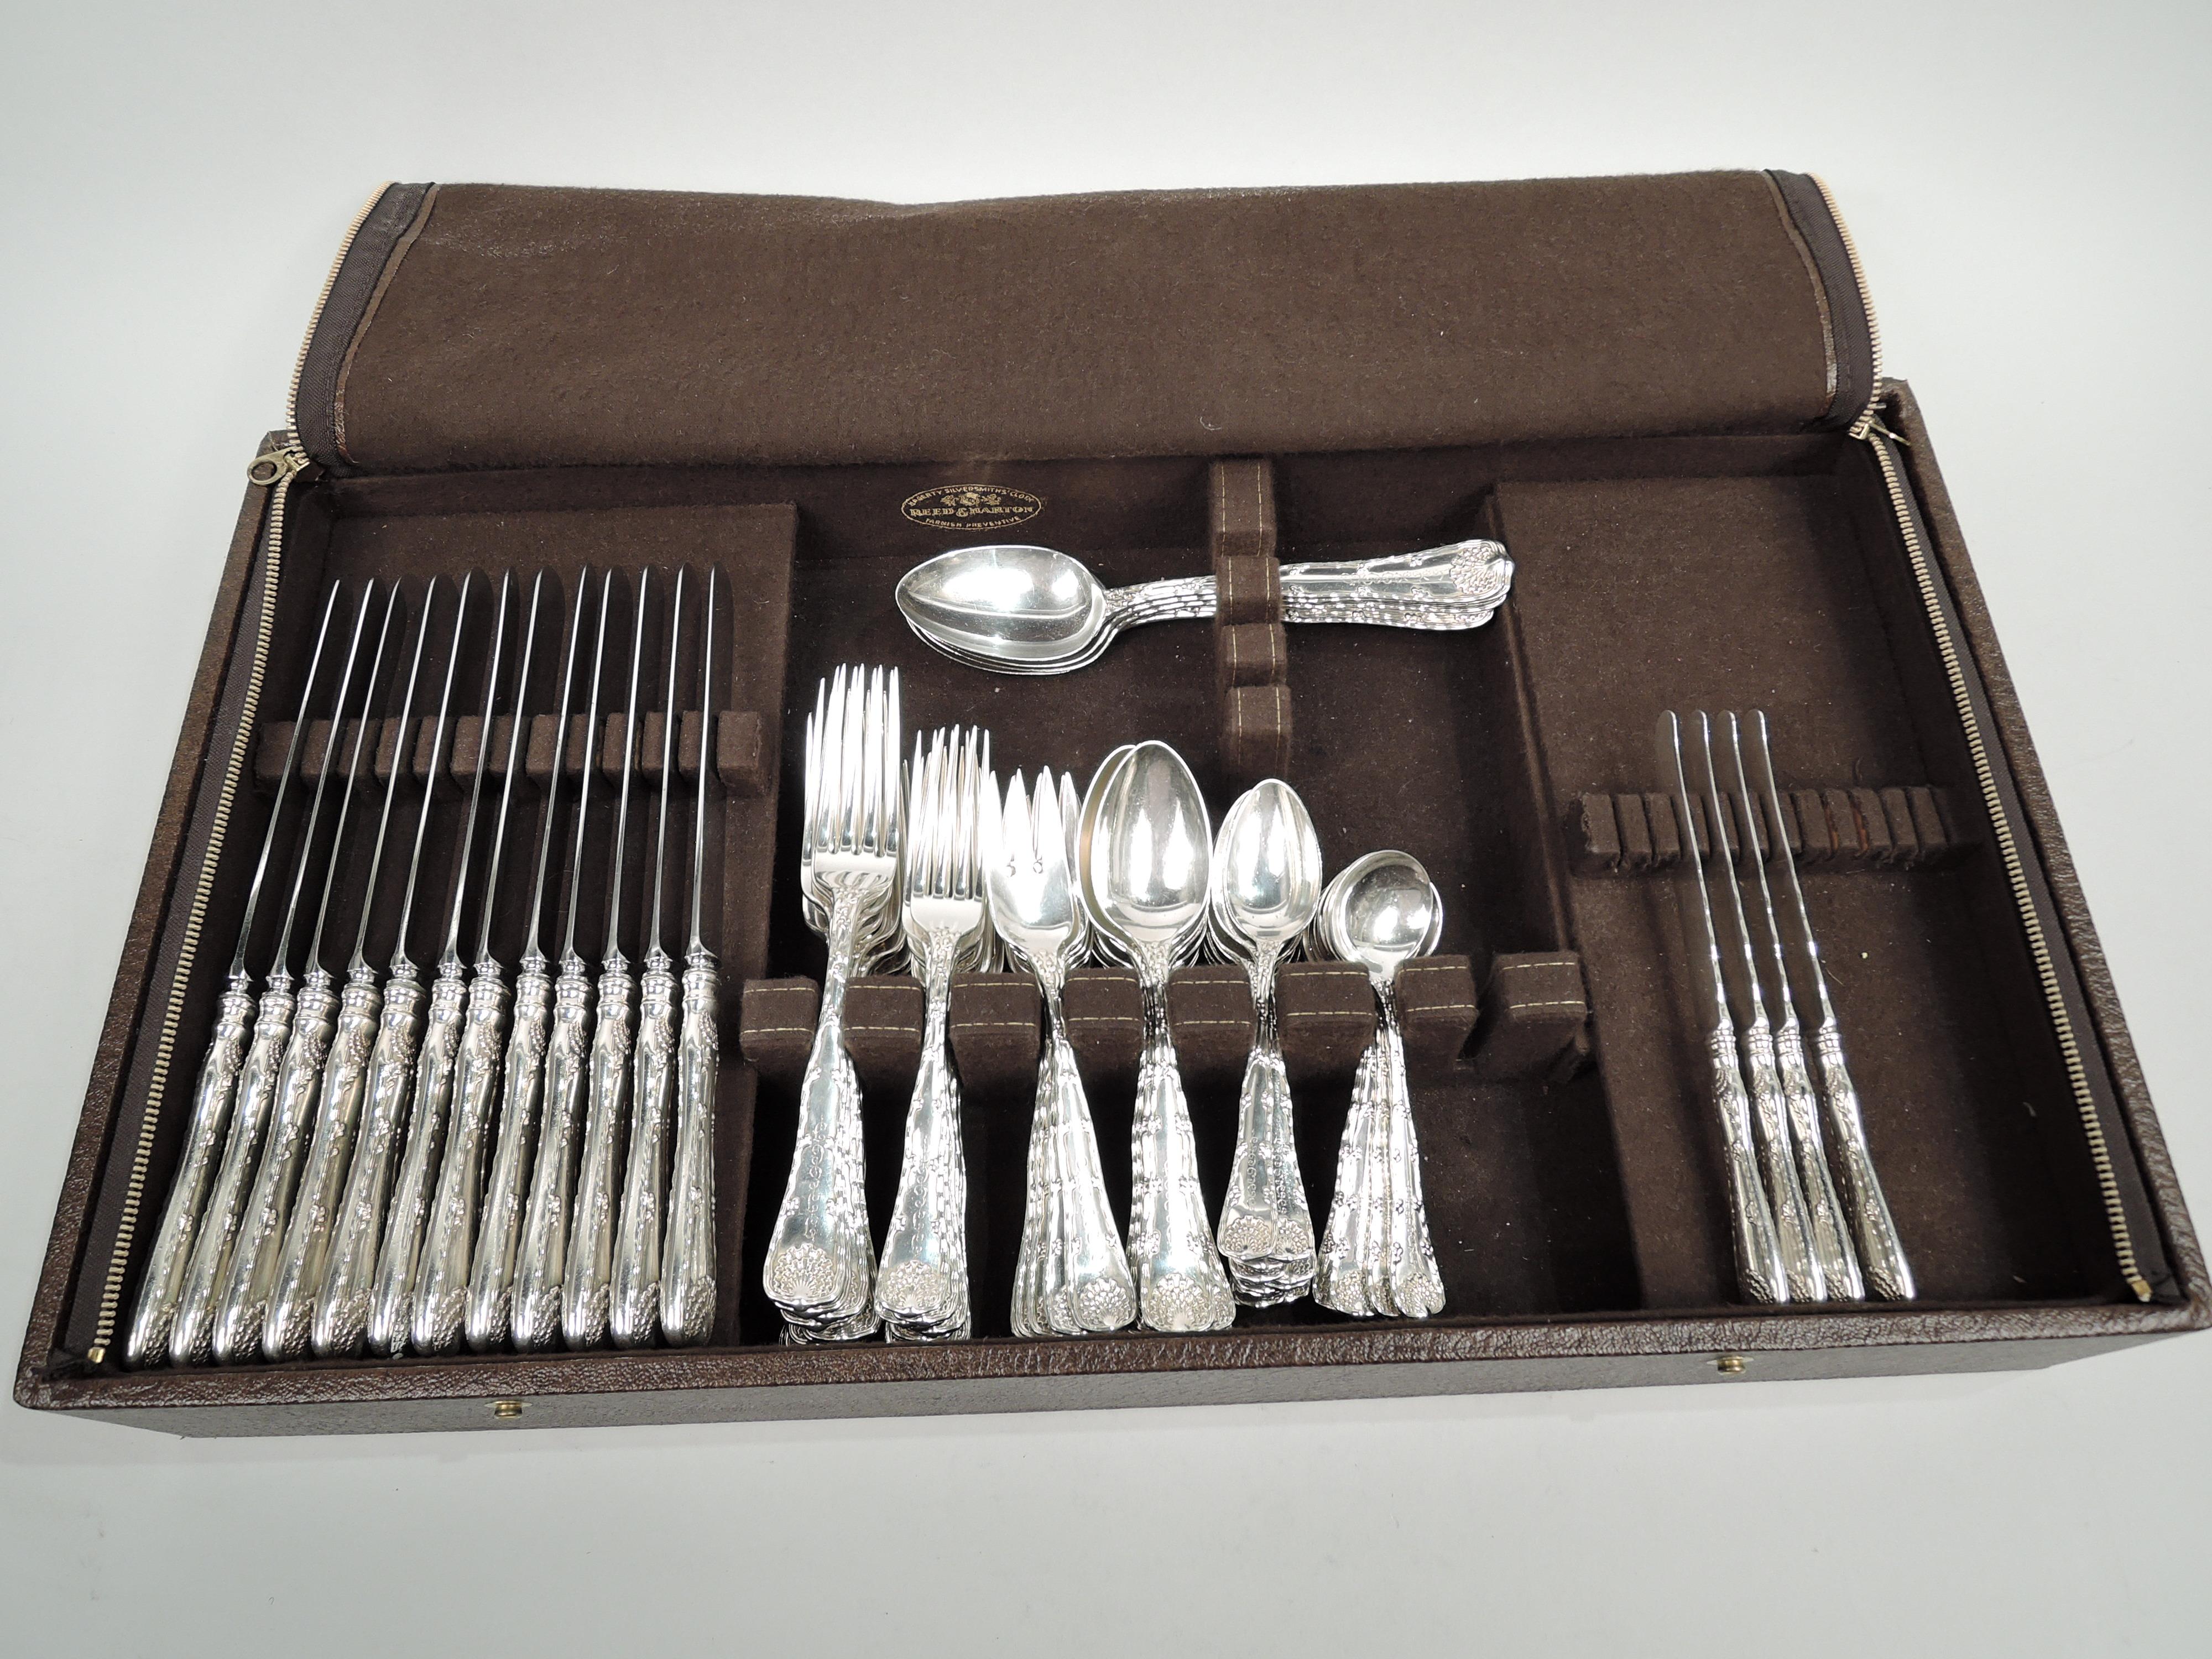 Wave Edge sterling silver flatware set. Made by Tiffany & Co. in New York, circa 1890. This set comprises 91 pieces (dimensions in inches):

Forks: 12 dinner forks (8), 12 luncheon forks (7), and 12 salad forks (6 3/4);

Knives: 12 dinner knives